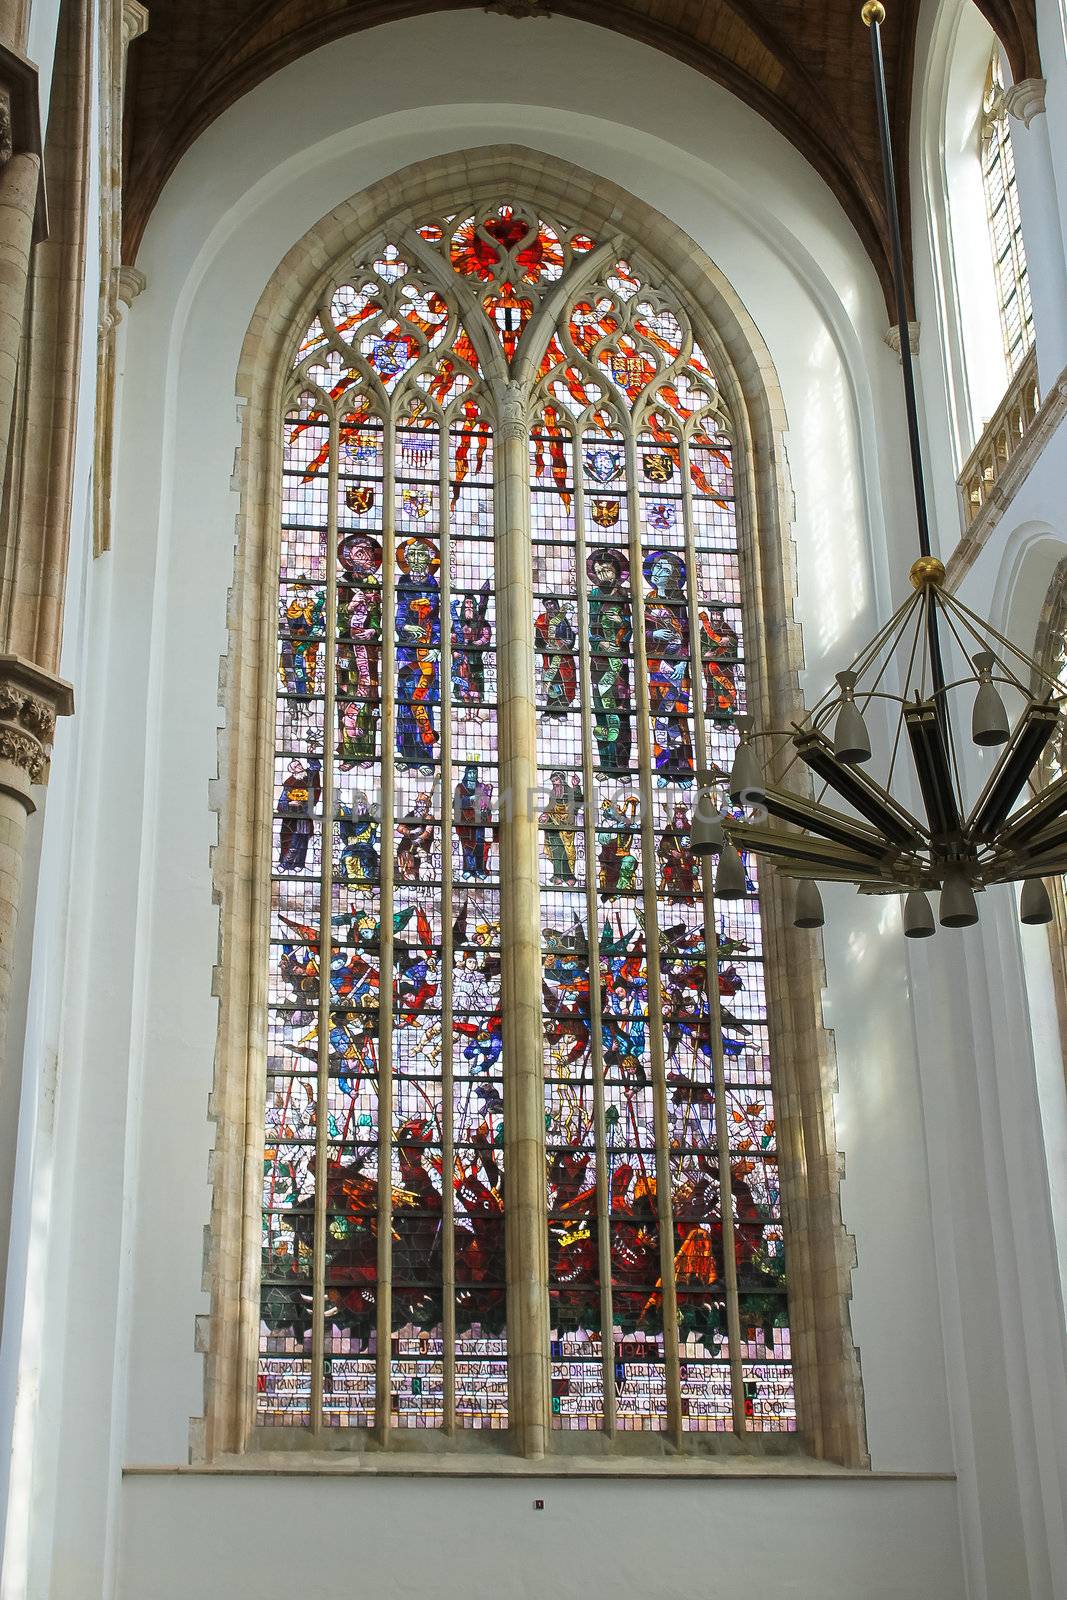 Stained glass in the church. Netherlands, Delft by NickNick